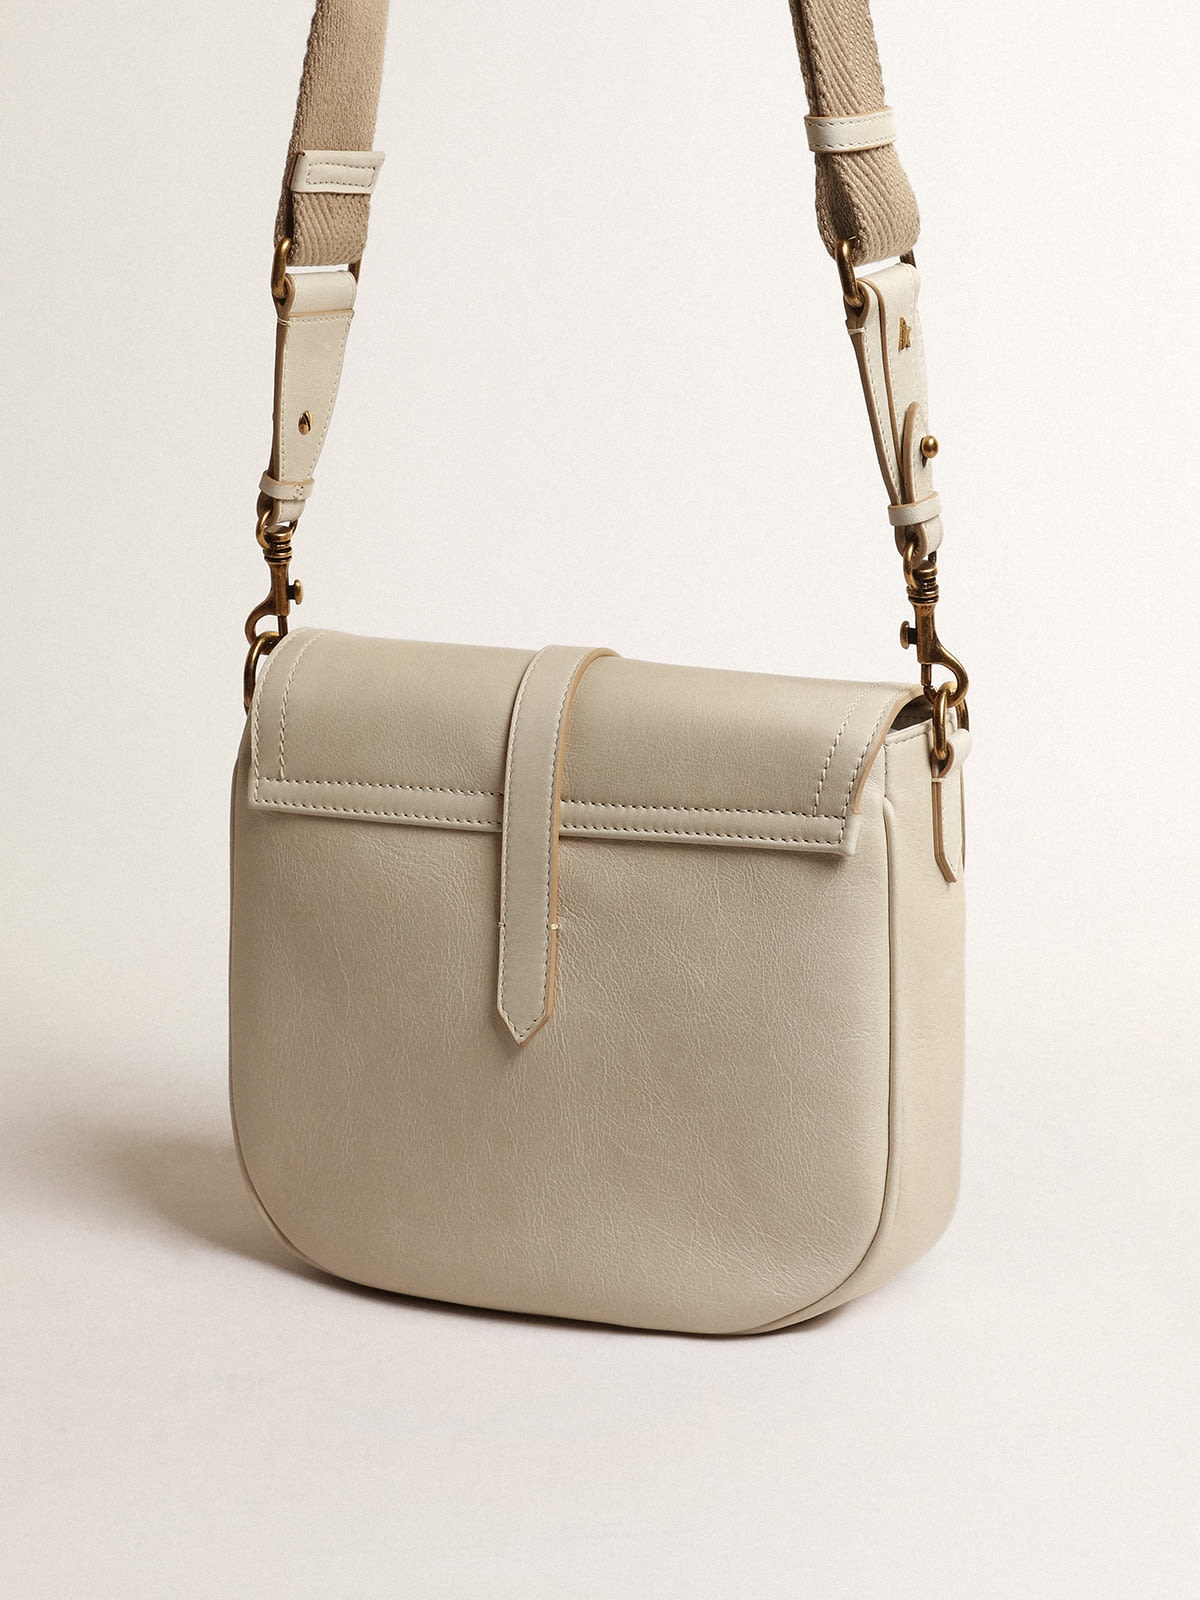 Medium Sally Bag in porcelain leather with buckle and contrasting shoulder strap - 5